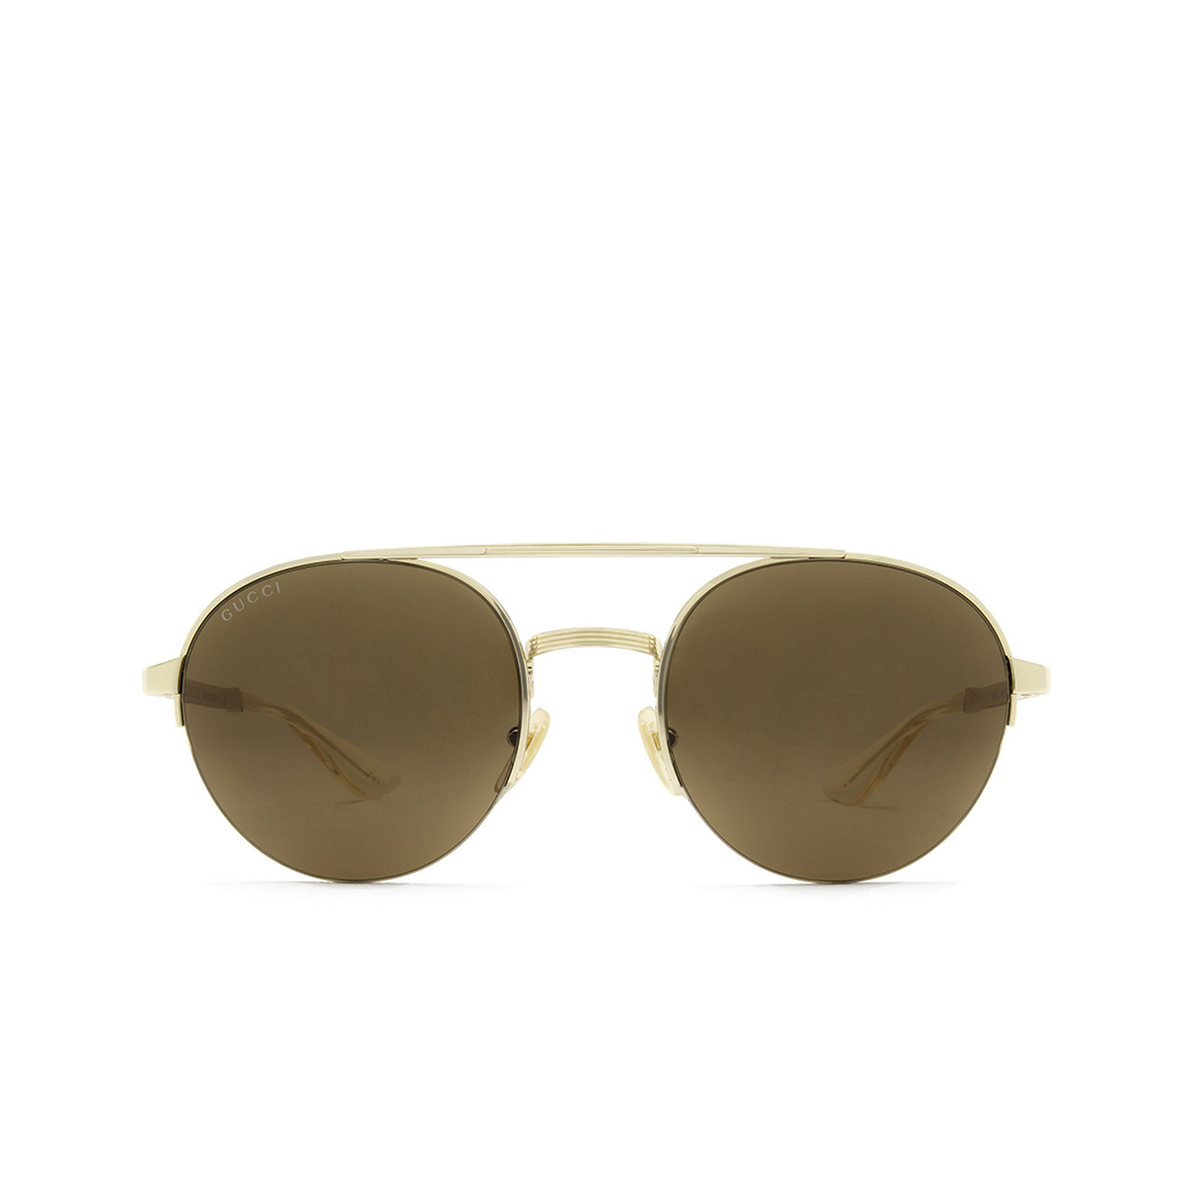 Gucci® Round Sunglasses: GG0984S color Gold 002 - front view.